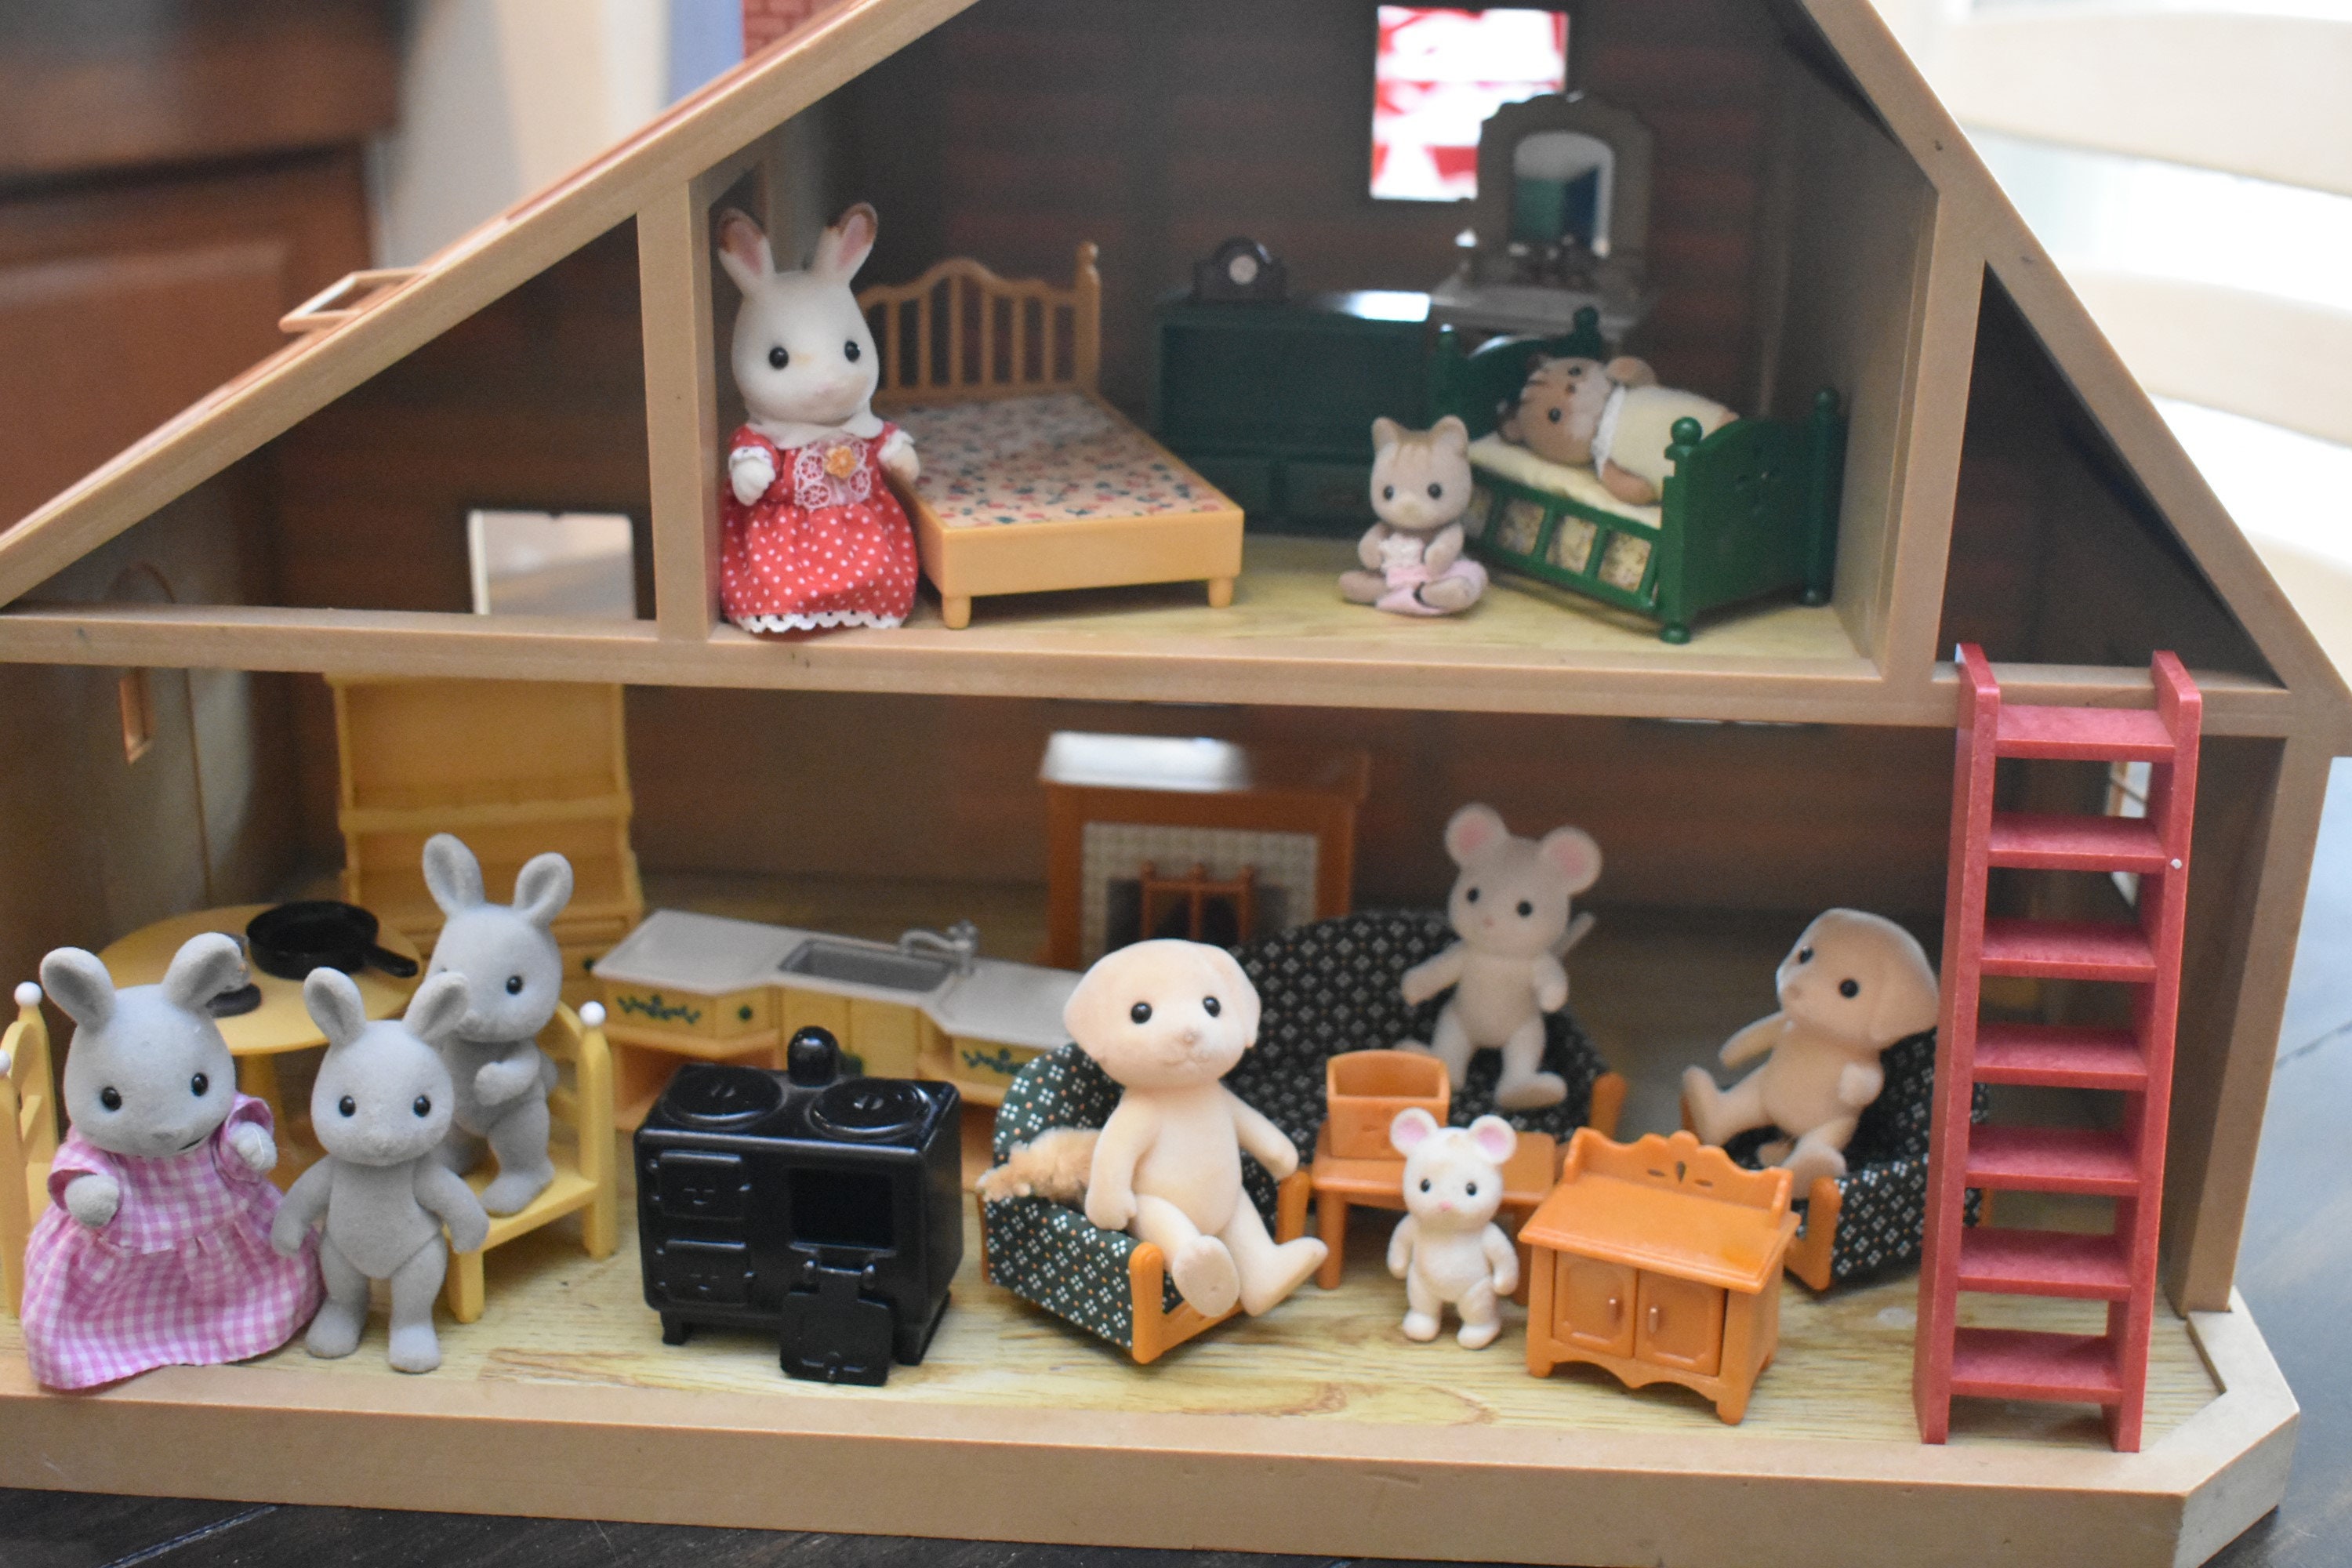 The Rarest Sylvanian Families Figurines and Sets Of All-Time